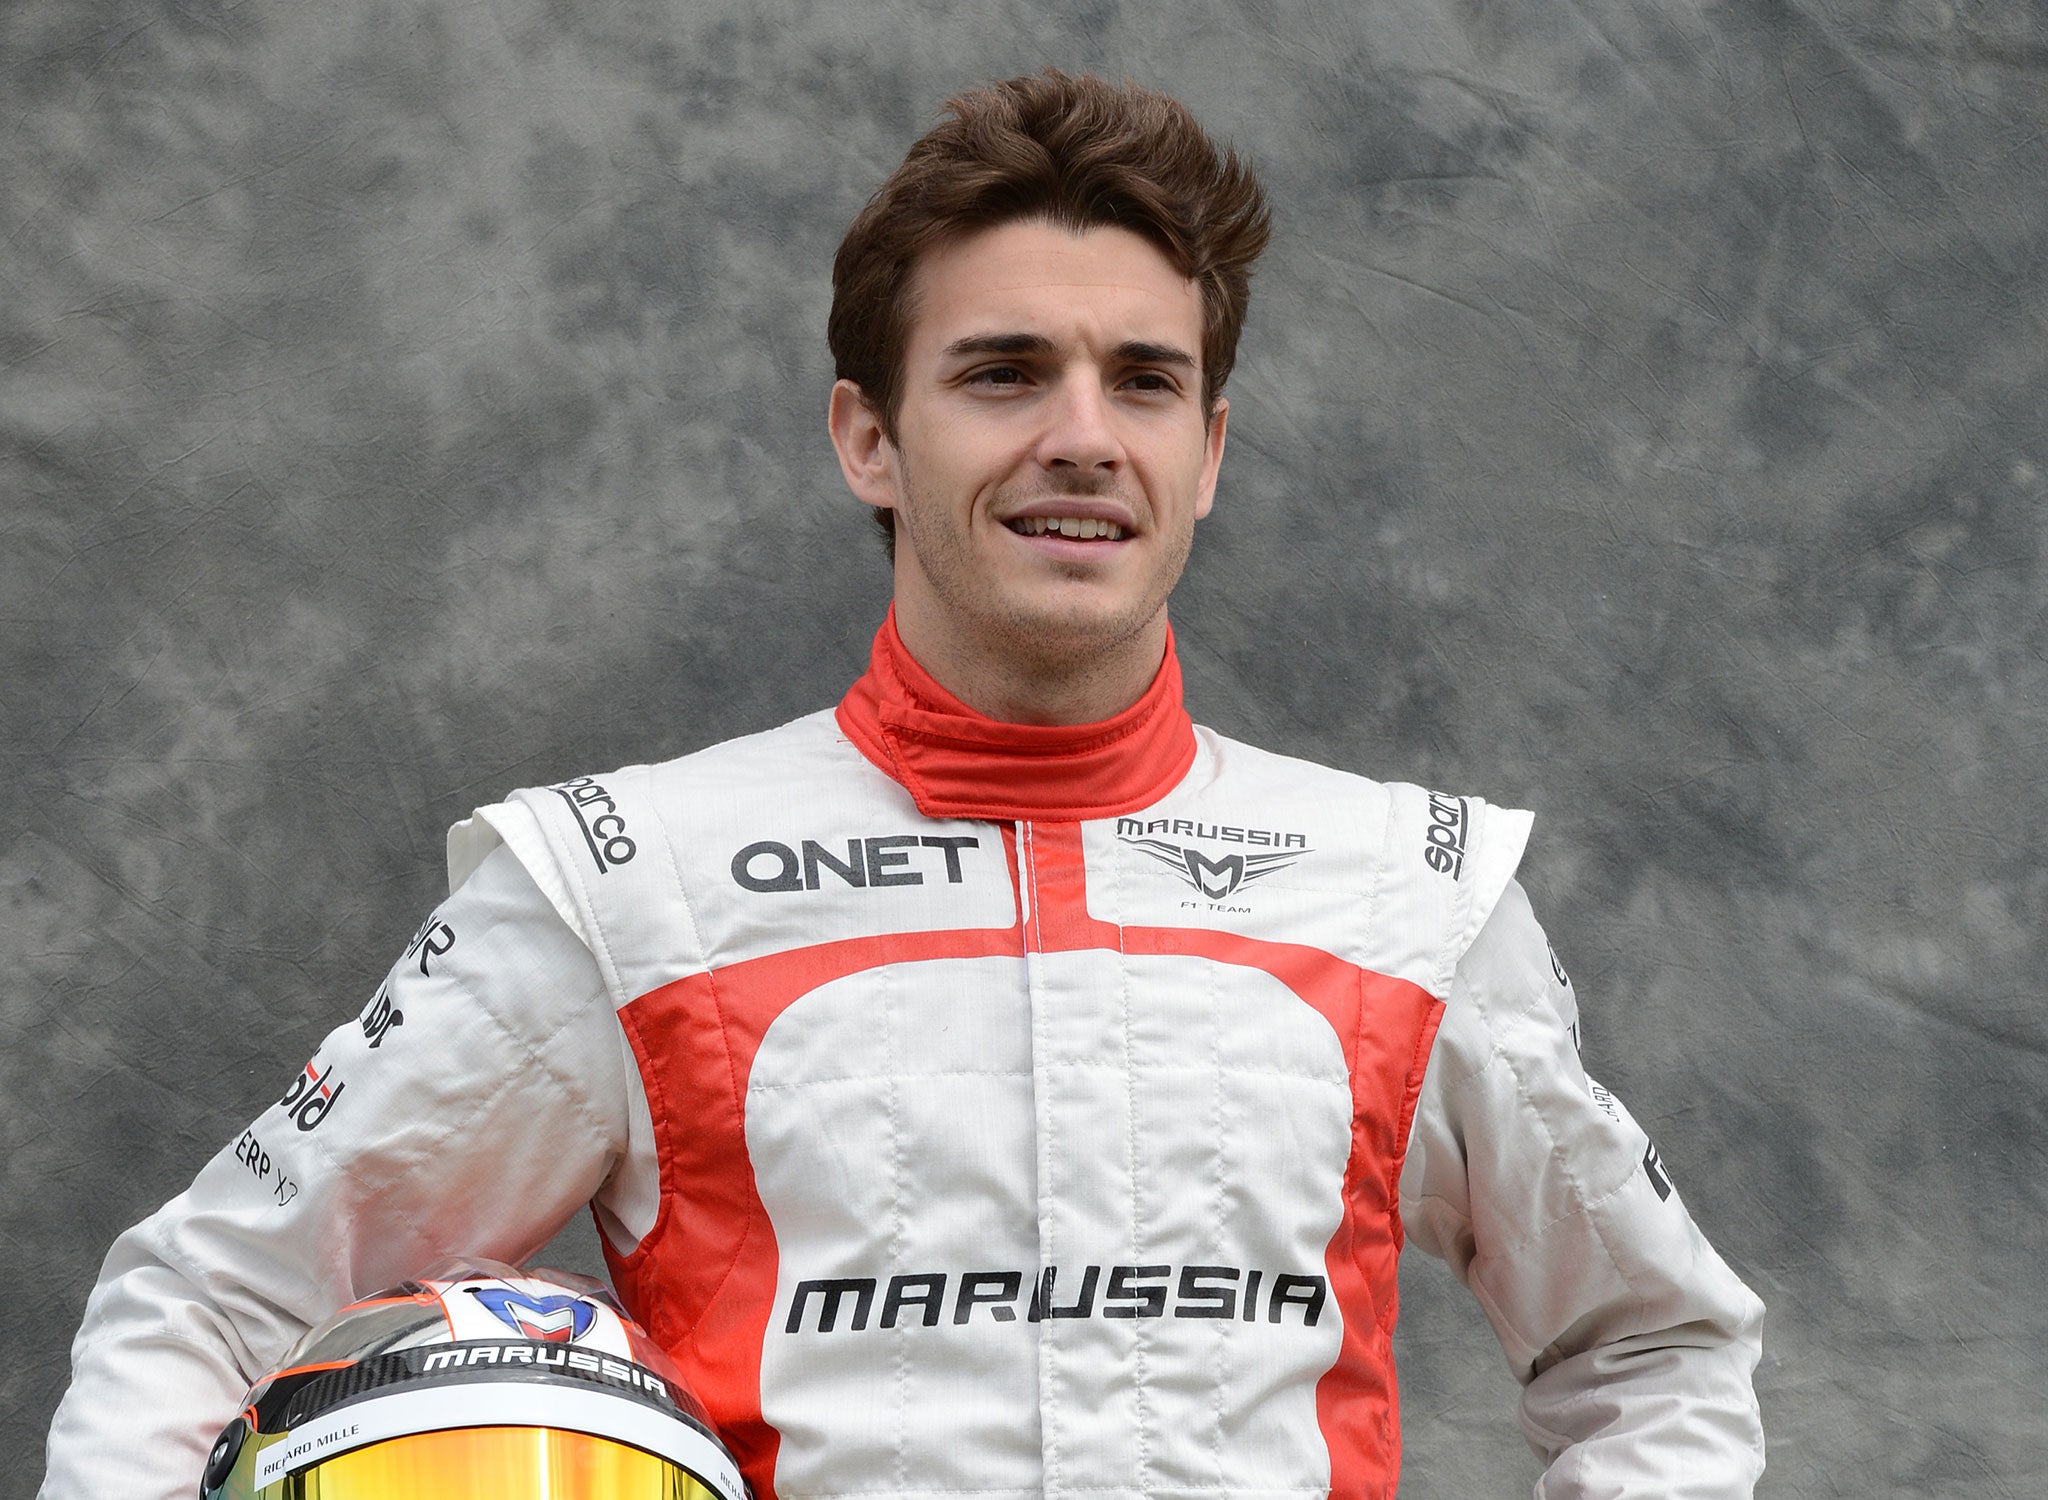 On March 1, 2013, Bianchi was announced to be replacing Luiz Razia as a first choice driver for the Marussia team.